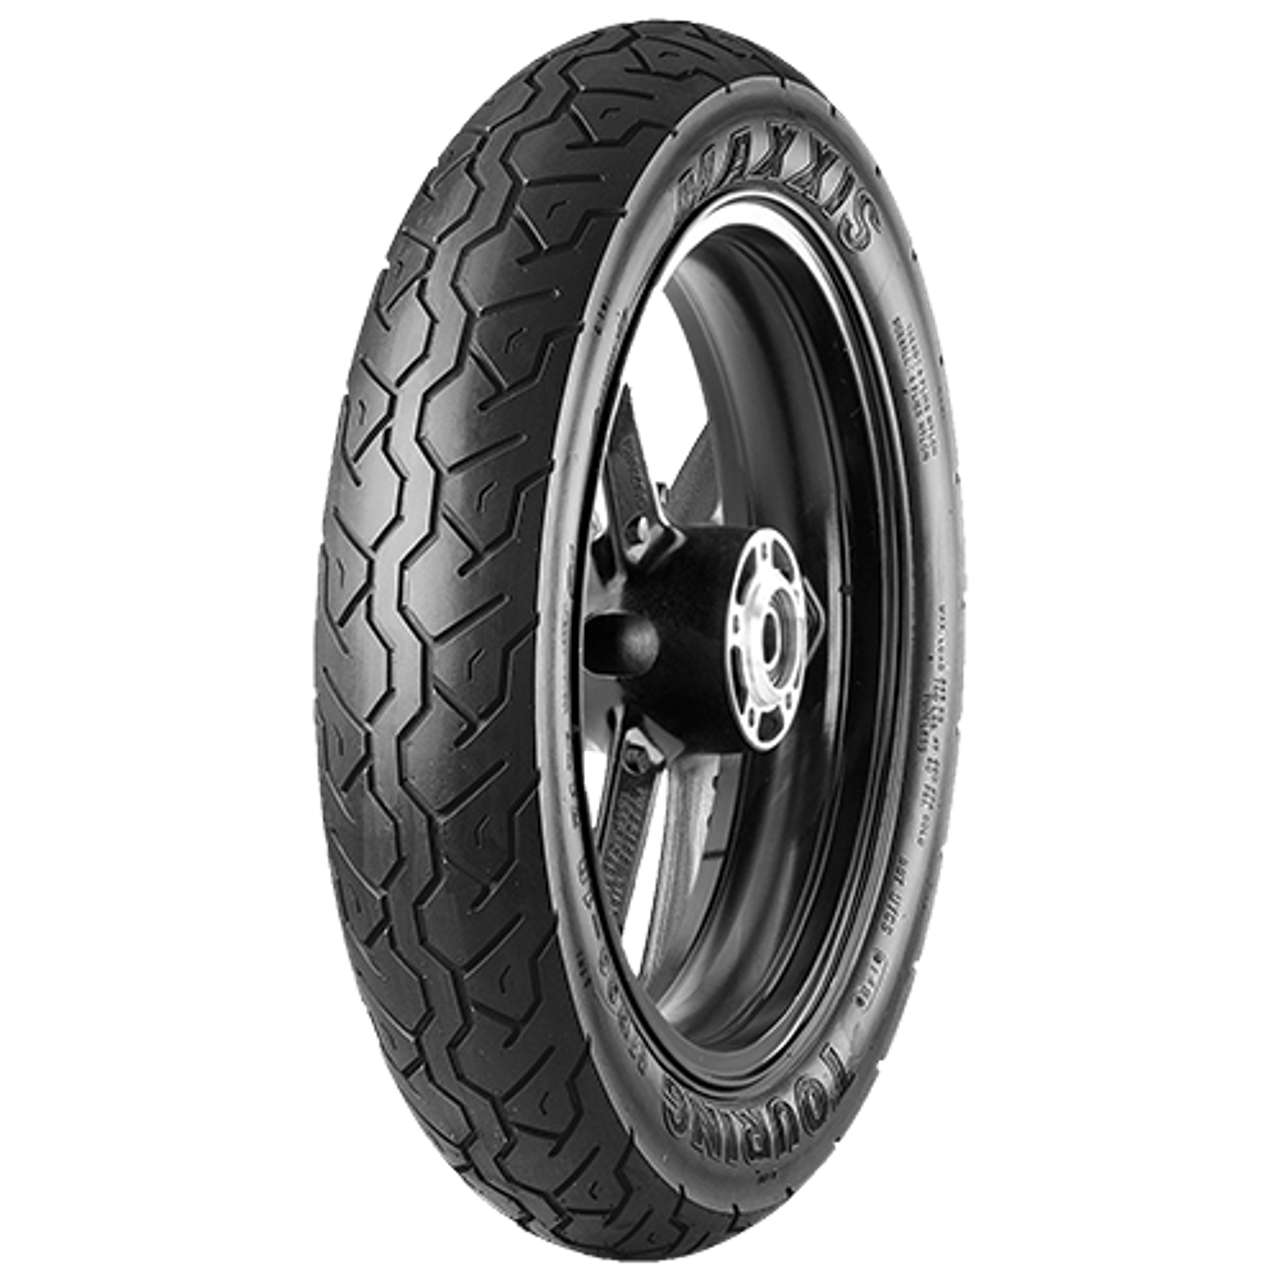 MAXXIS M6011 CLASSIC FRONT 90 - 21 TL 56H FRONT von MAXXIS